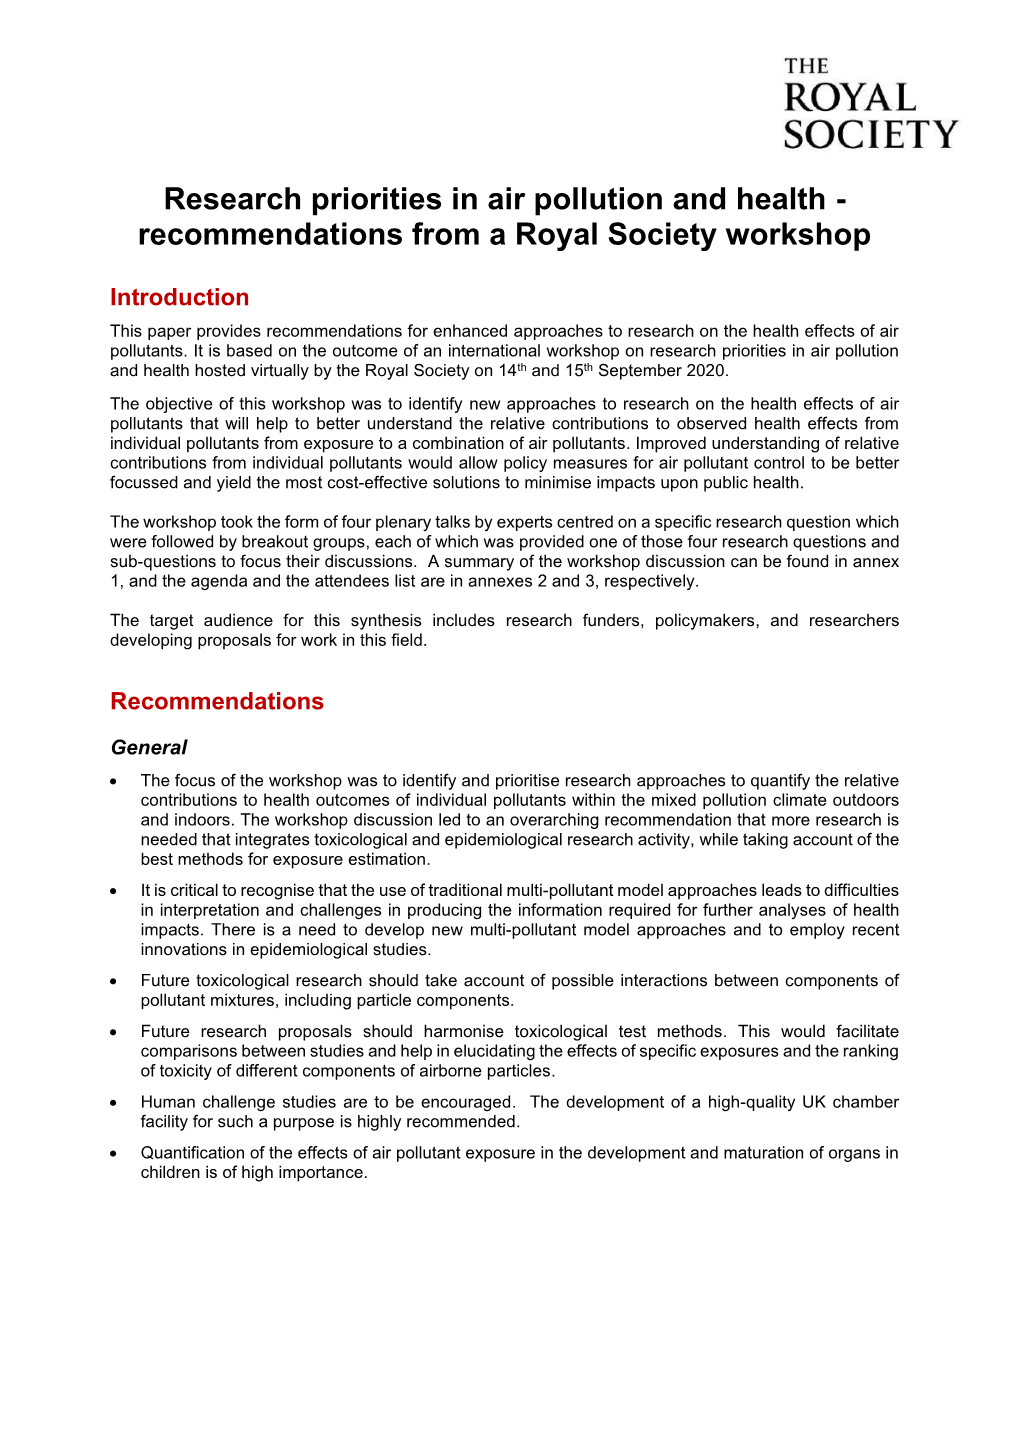 Research Priorities in Air Pollution and Health - Recommendations from a Royal Society Workshop